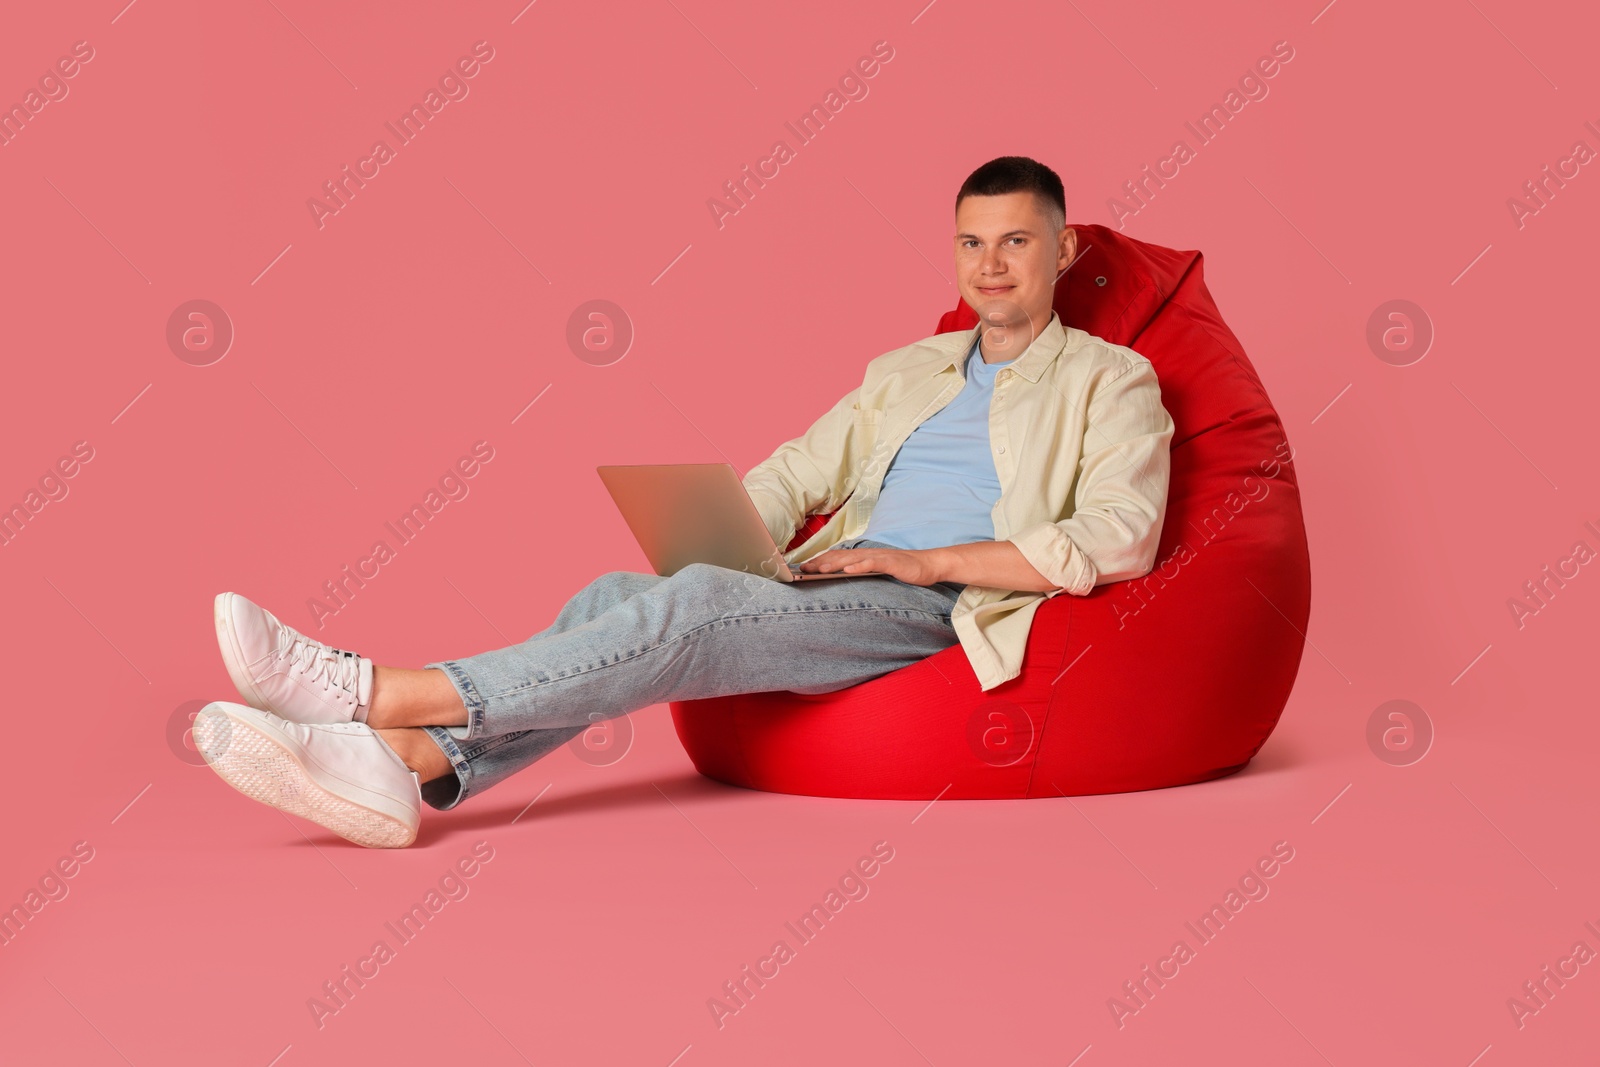 Photo of Handsome man with laptop on red bean bag chair against pink background